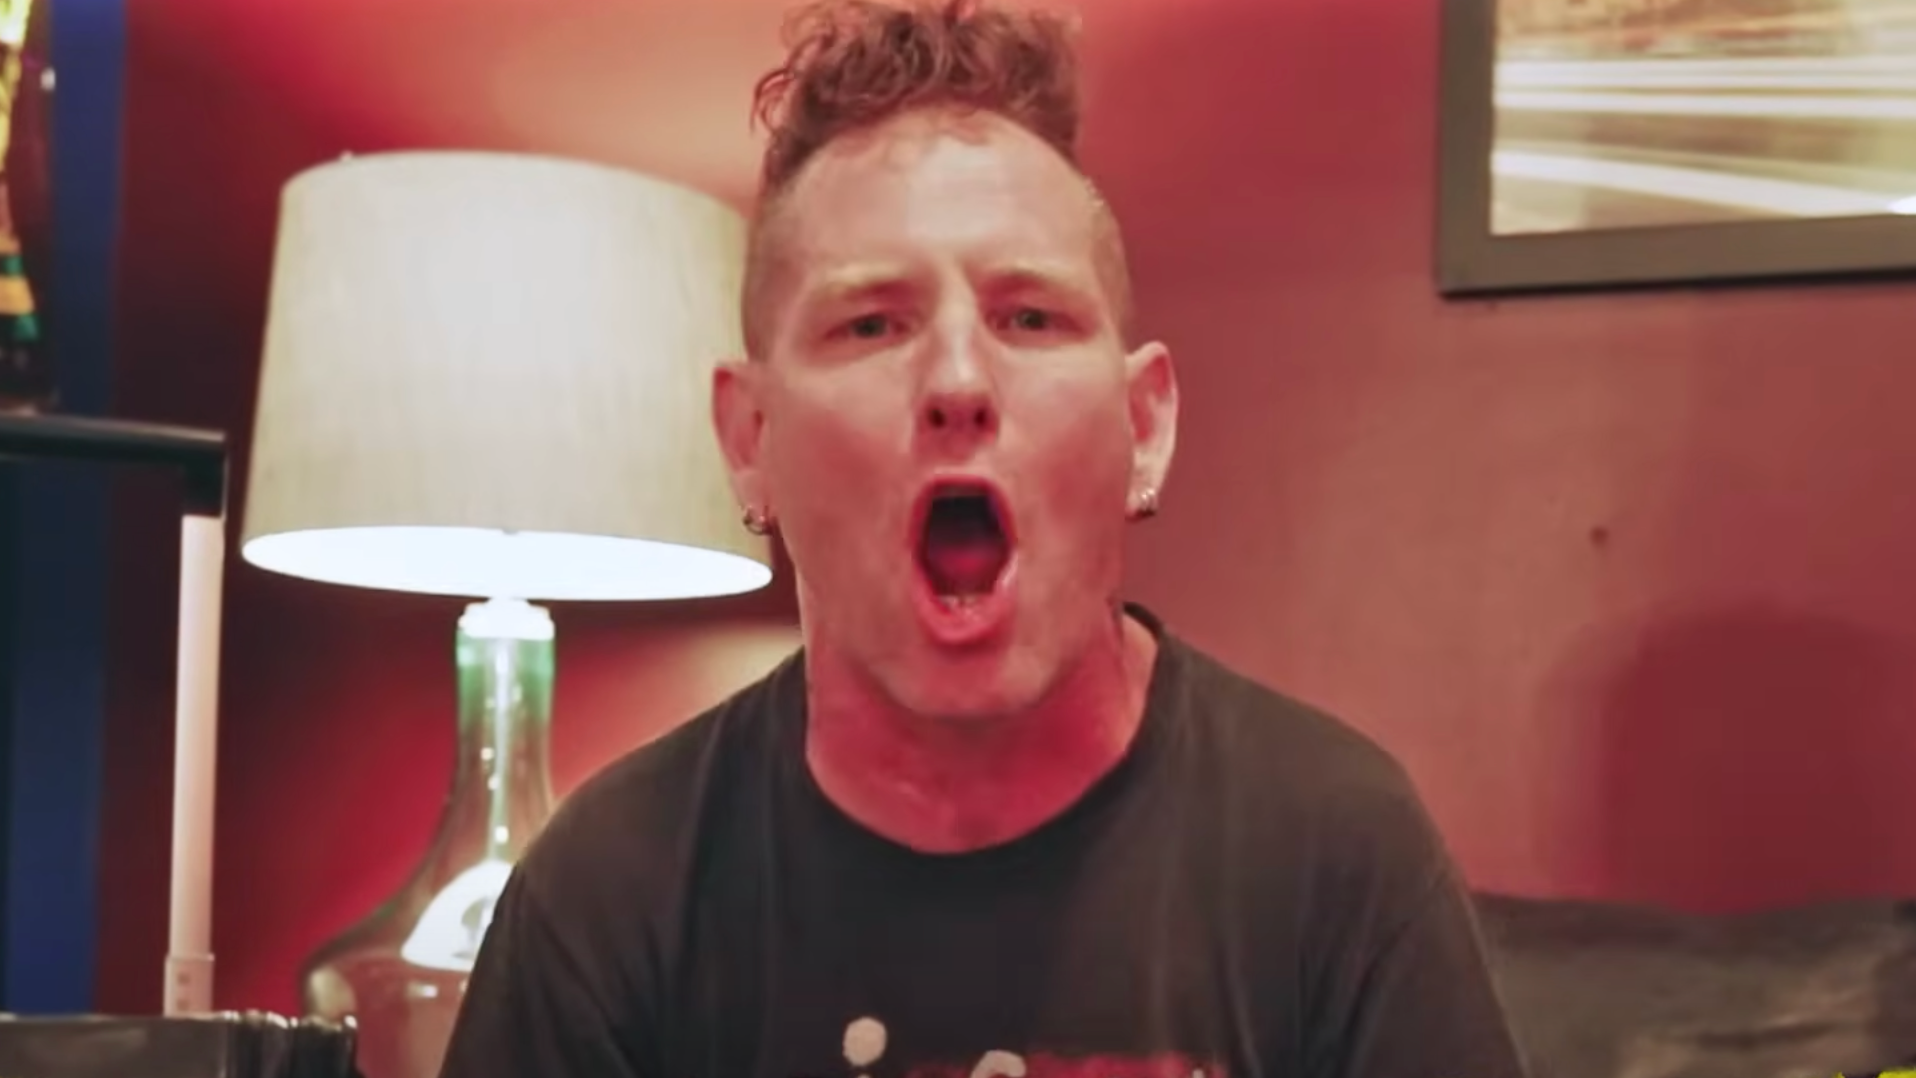 Watch Corey Taylor react to hilarious trash talk from fans